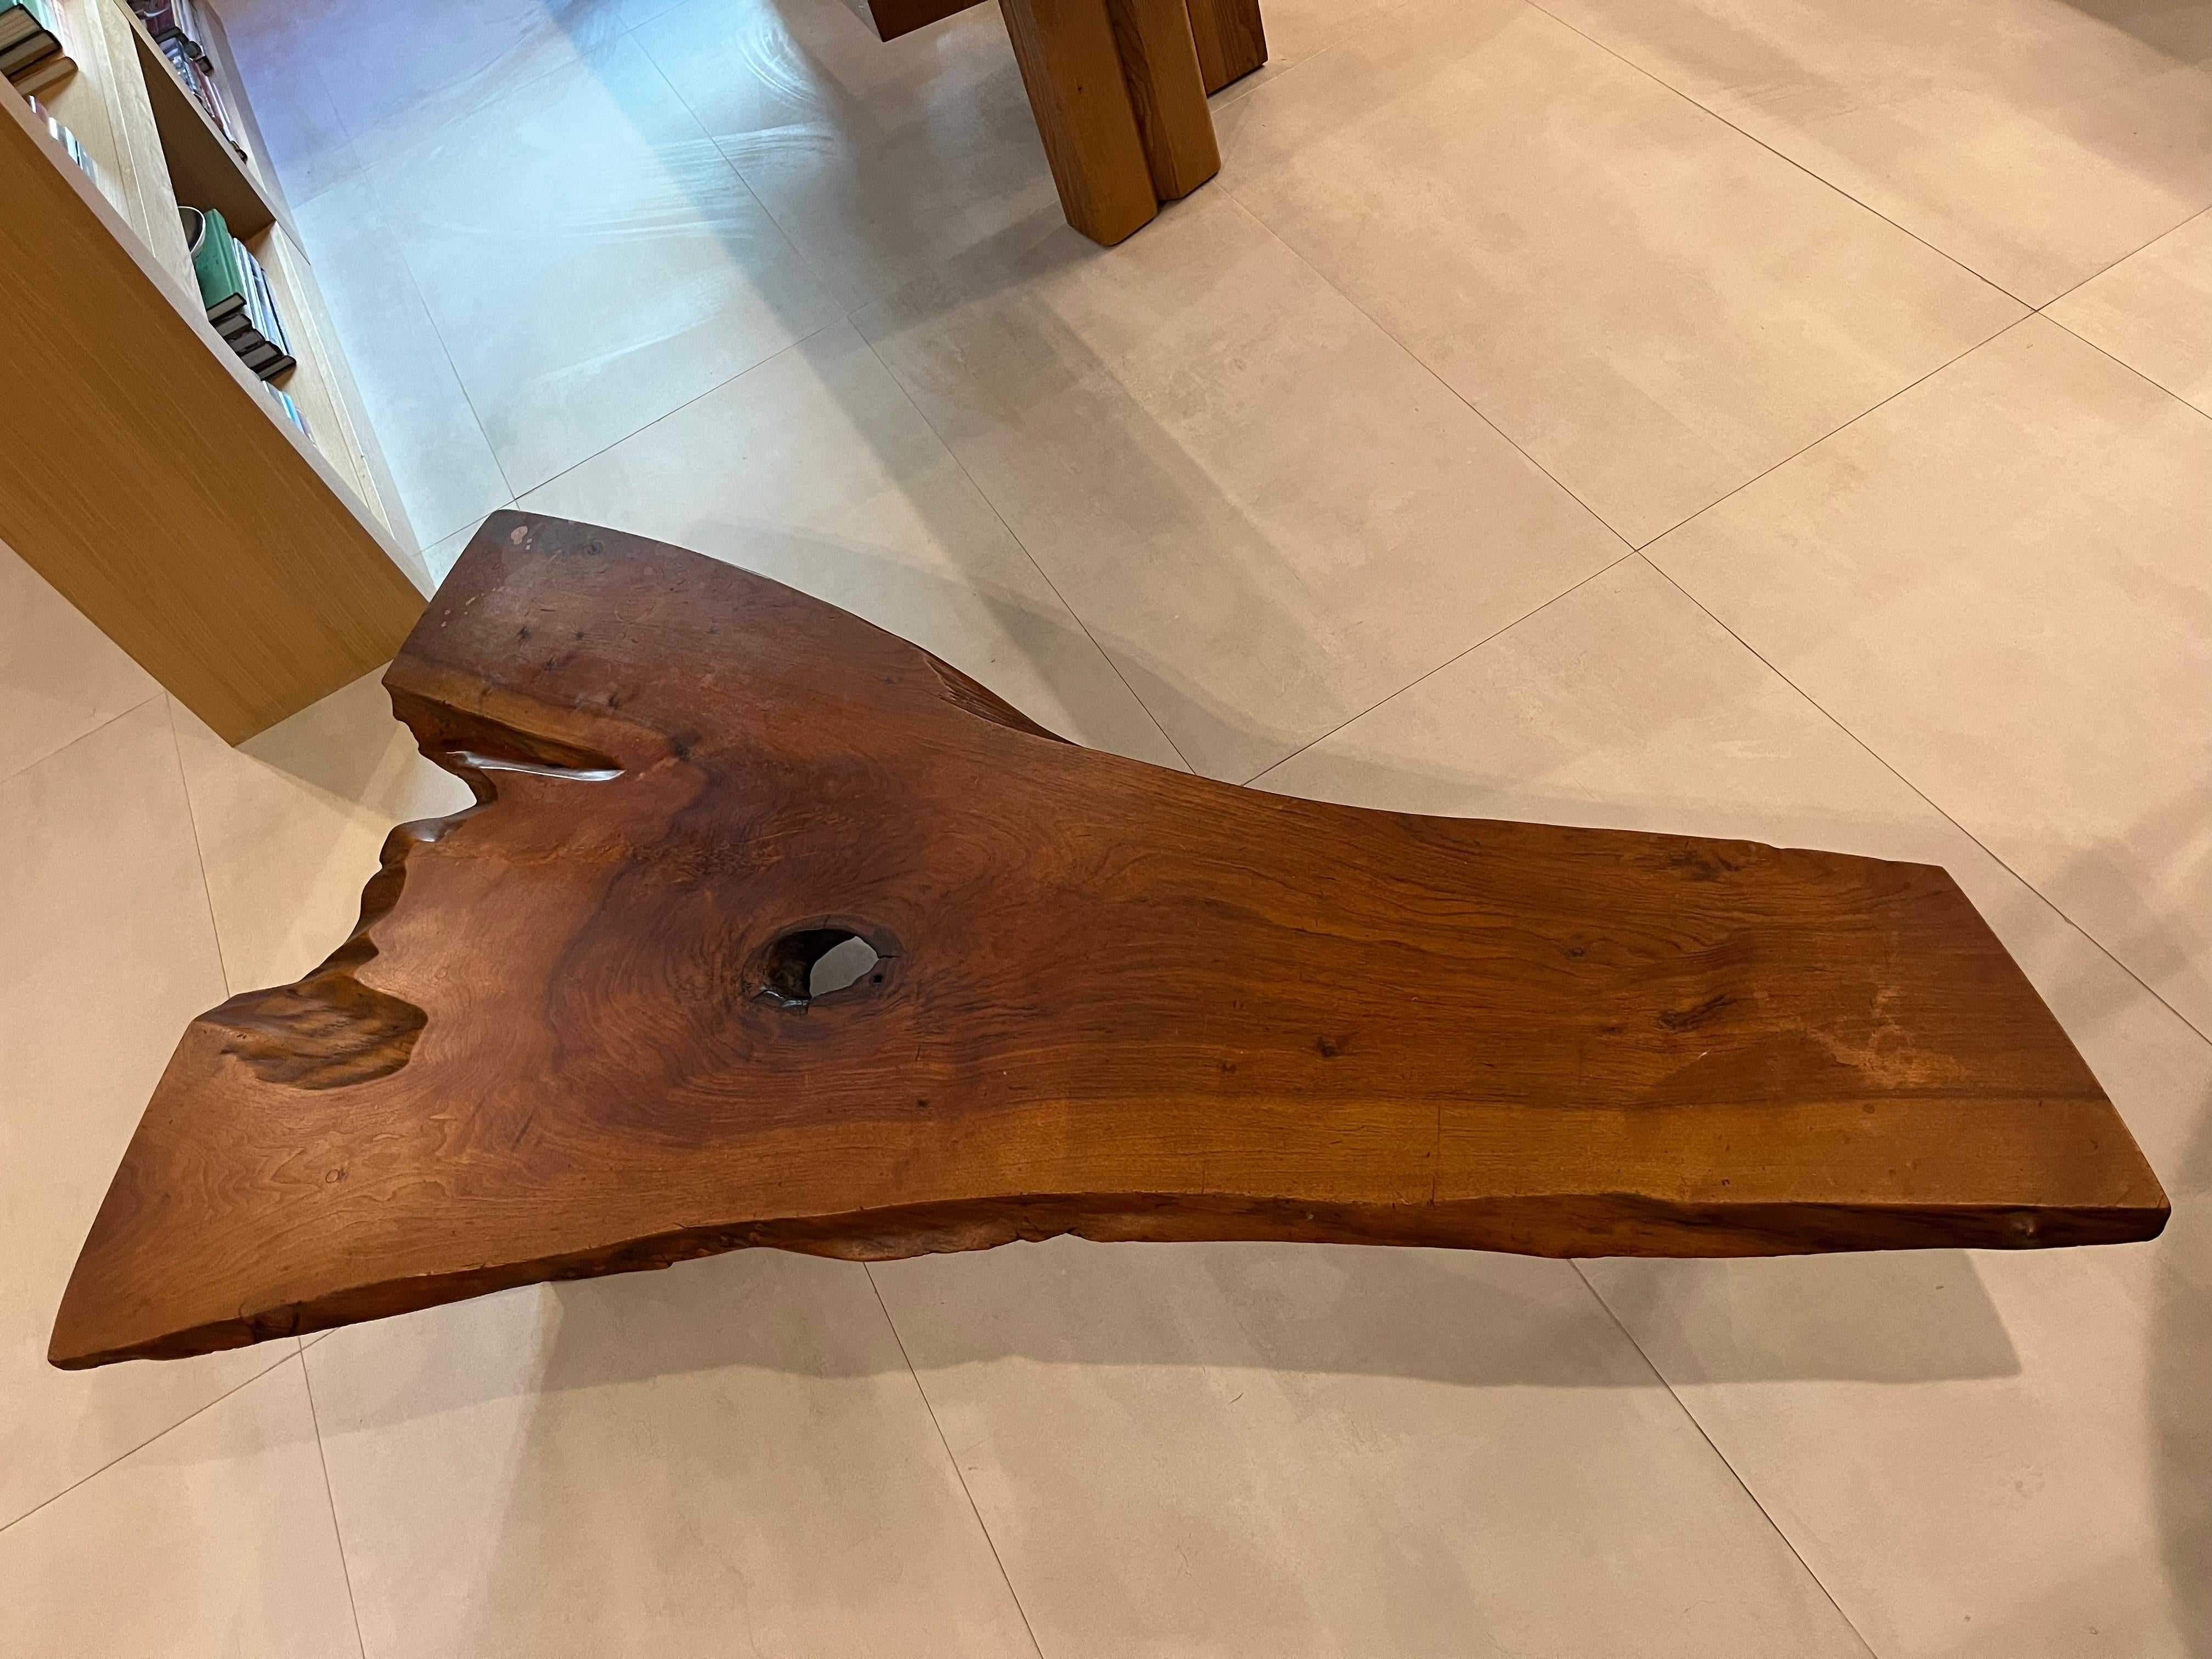 Stunning George Nakashima Slab Coffee Table, Walnut. 1960.
Table features a single slab top with three free edges, expressive figured grain, sap grain detail, and one exposed knot.
Sold with a digital copy of the original order card.